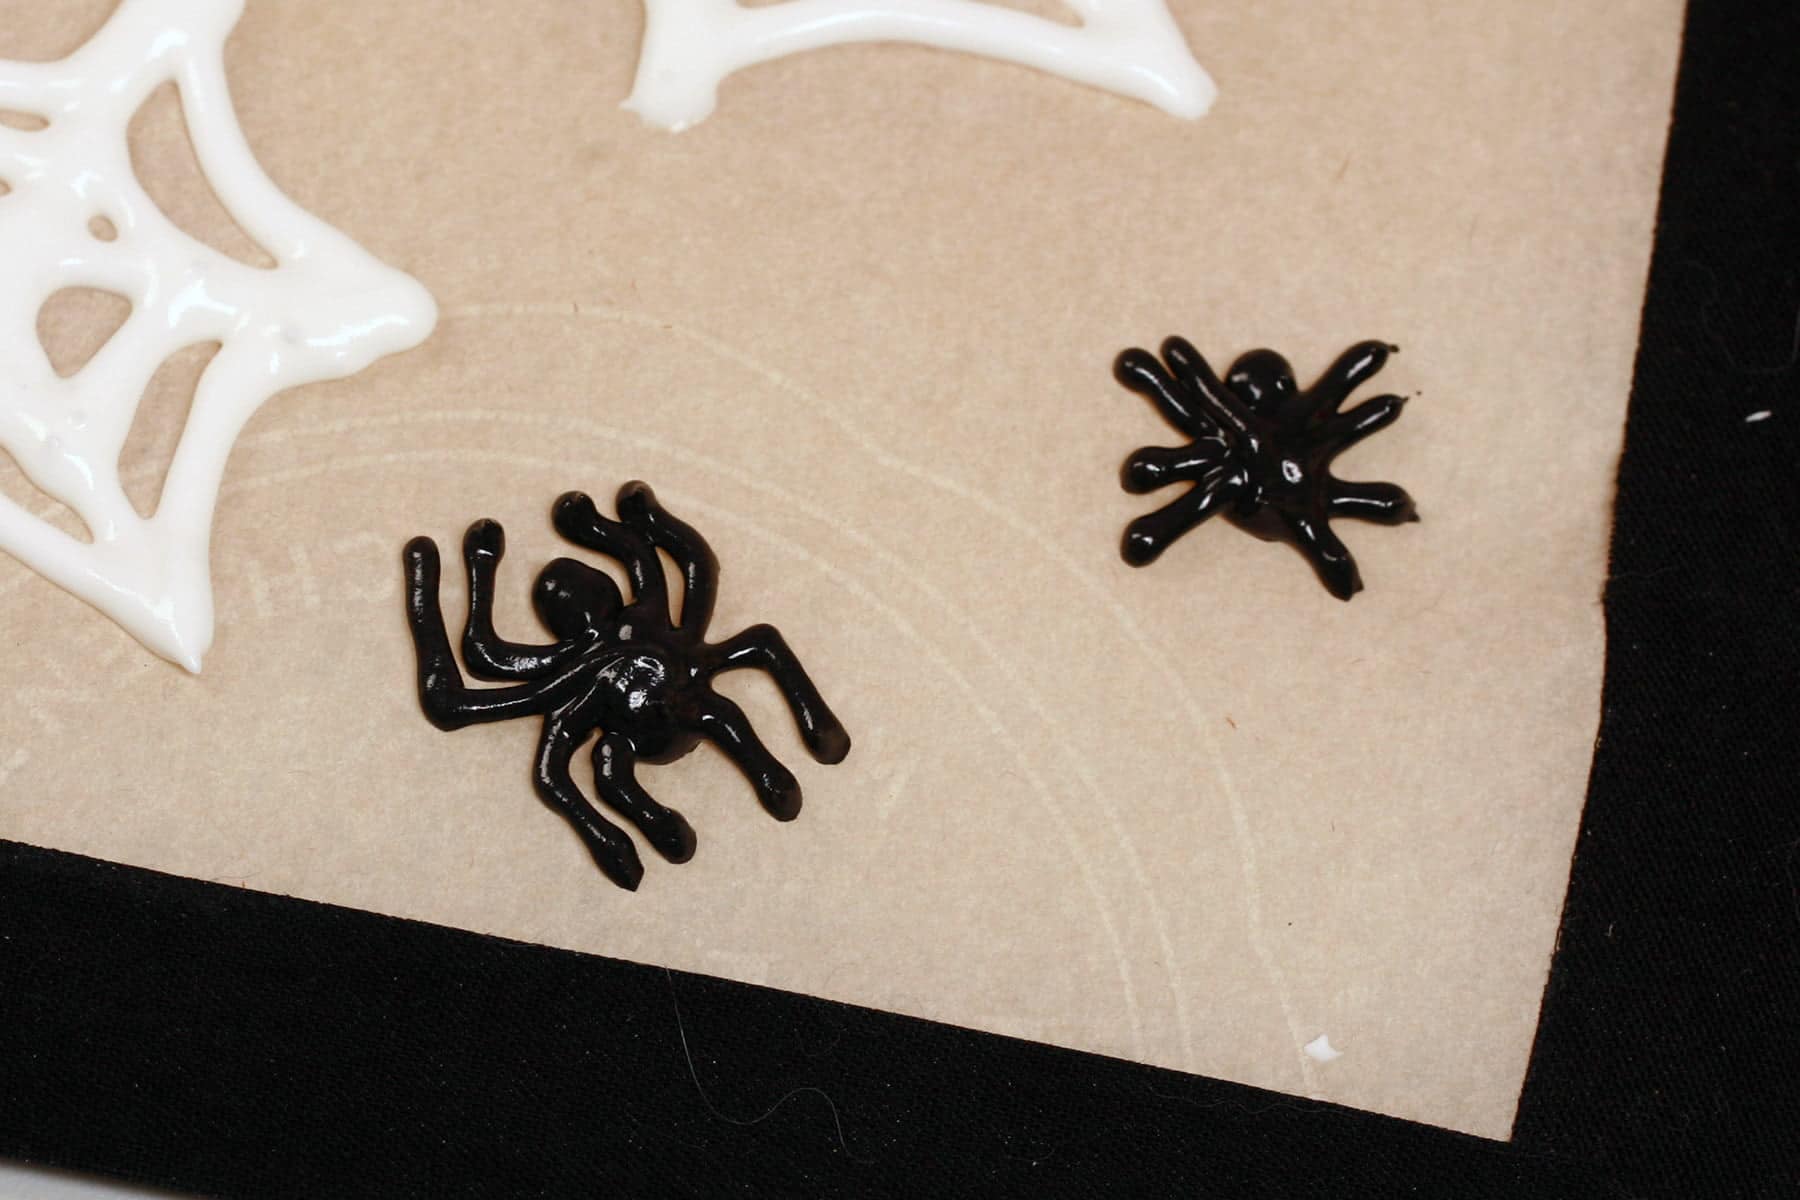 a close up view of two shiny black spiders, piped out of royal icing.